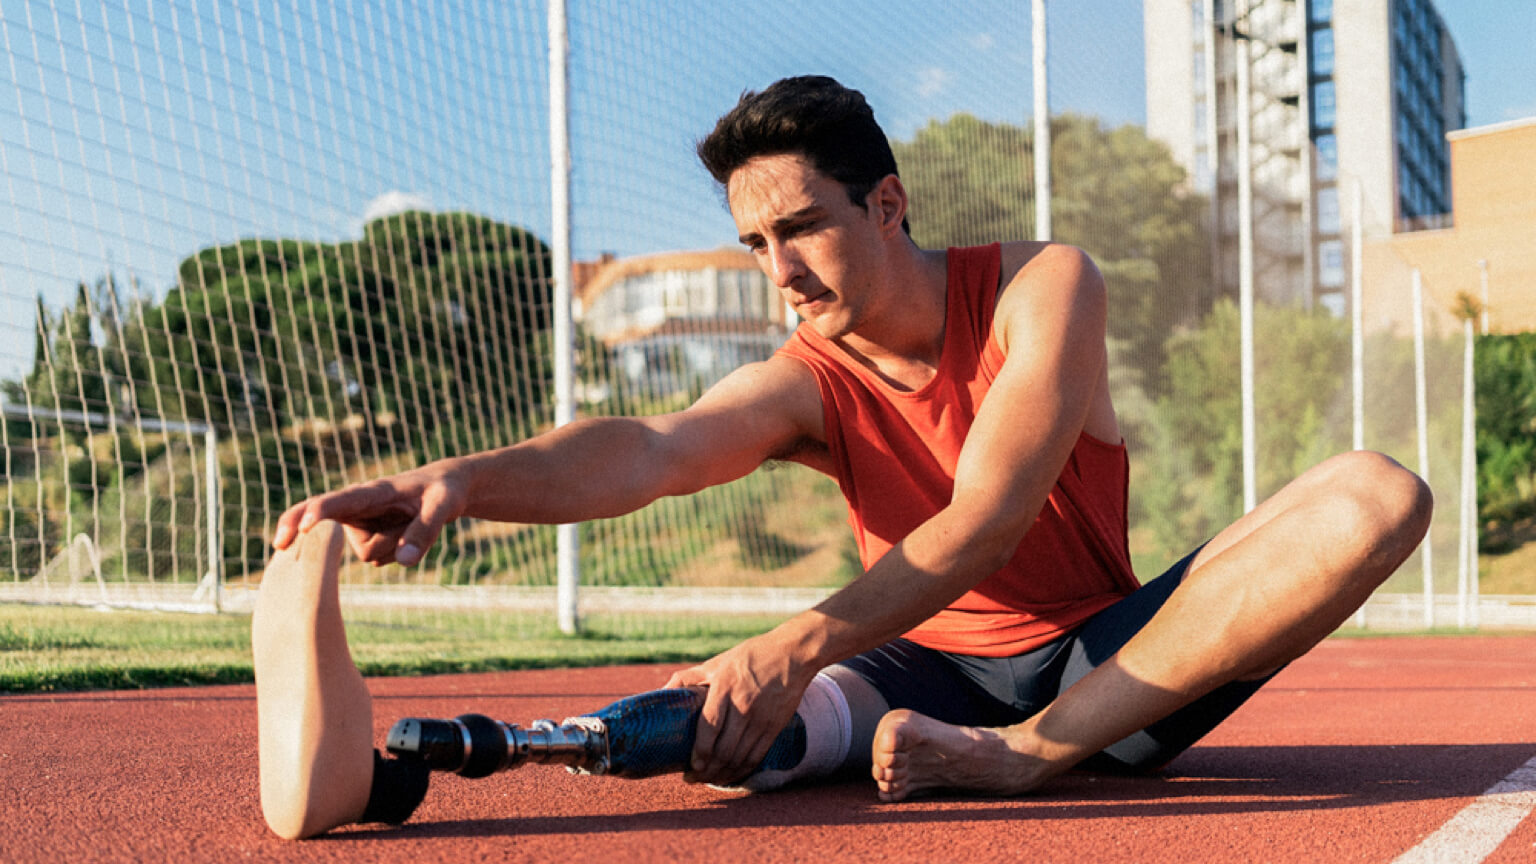 Person with prosthetic leg sitting on an outdoor track stretching.